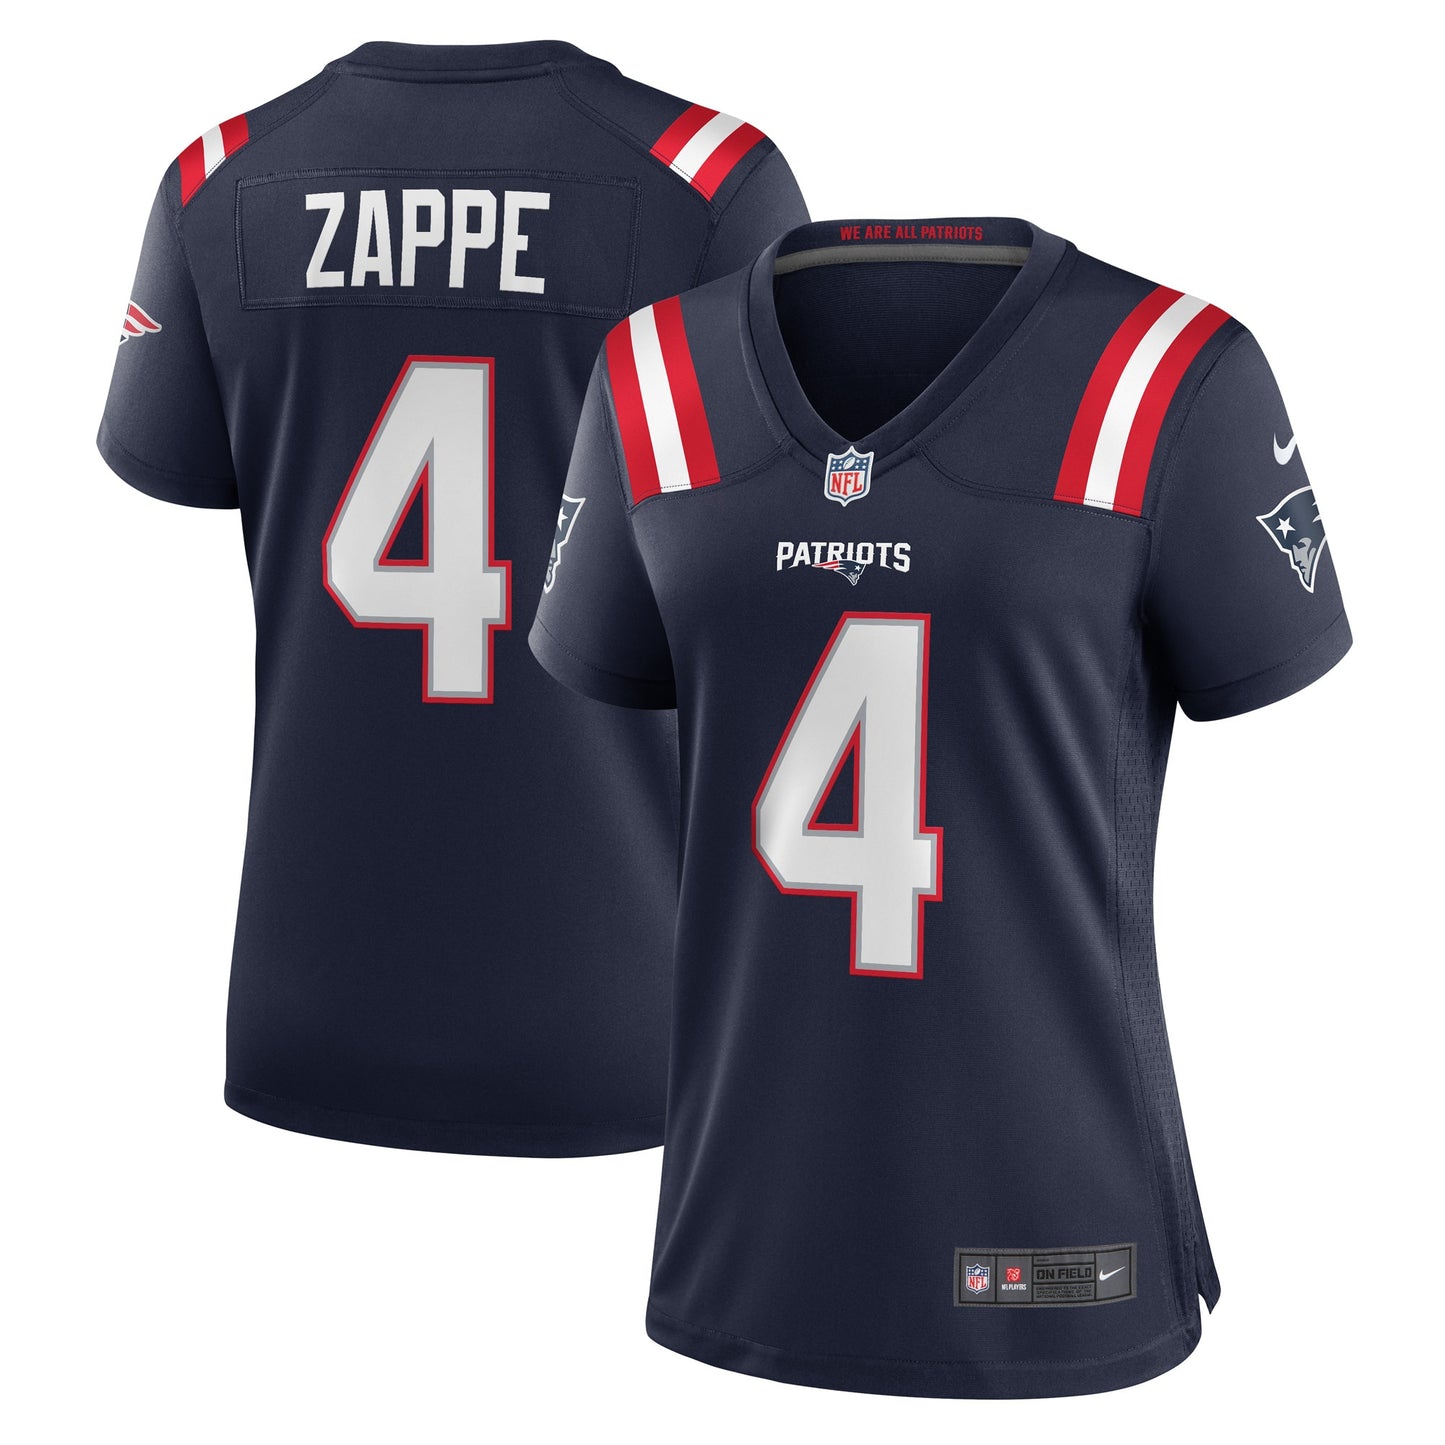 Bailey Zappe New England Patriots Nike Women's Game Player Jersey - Navy